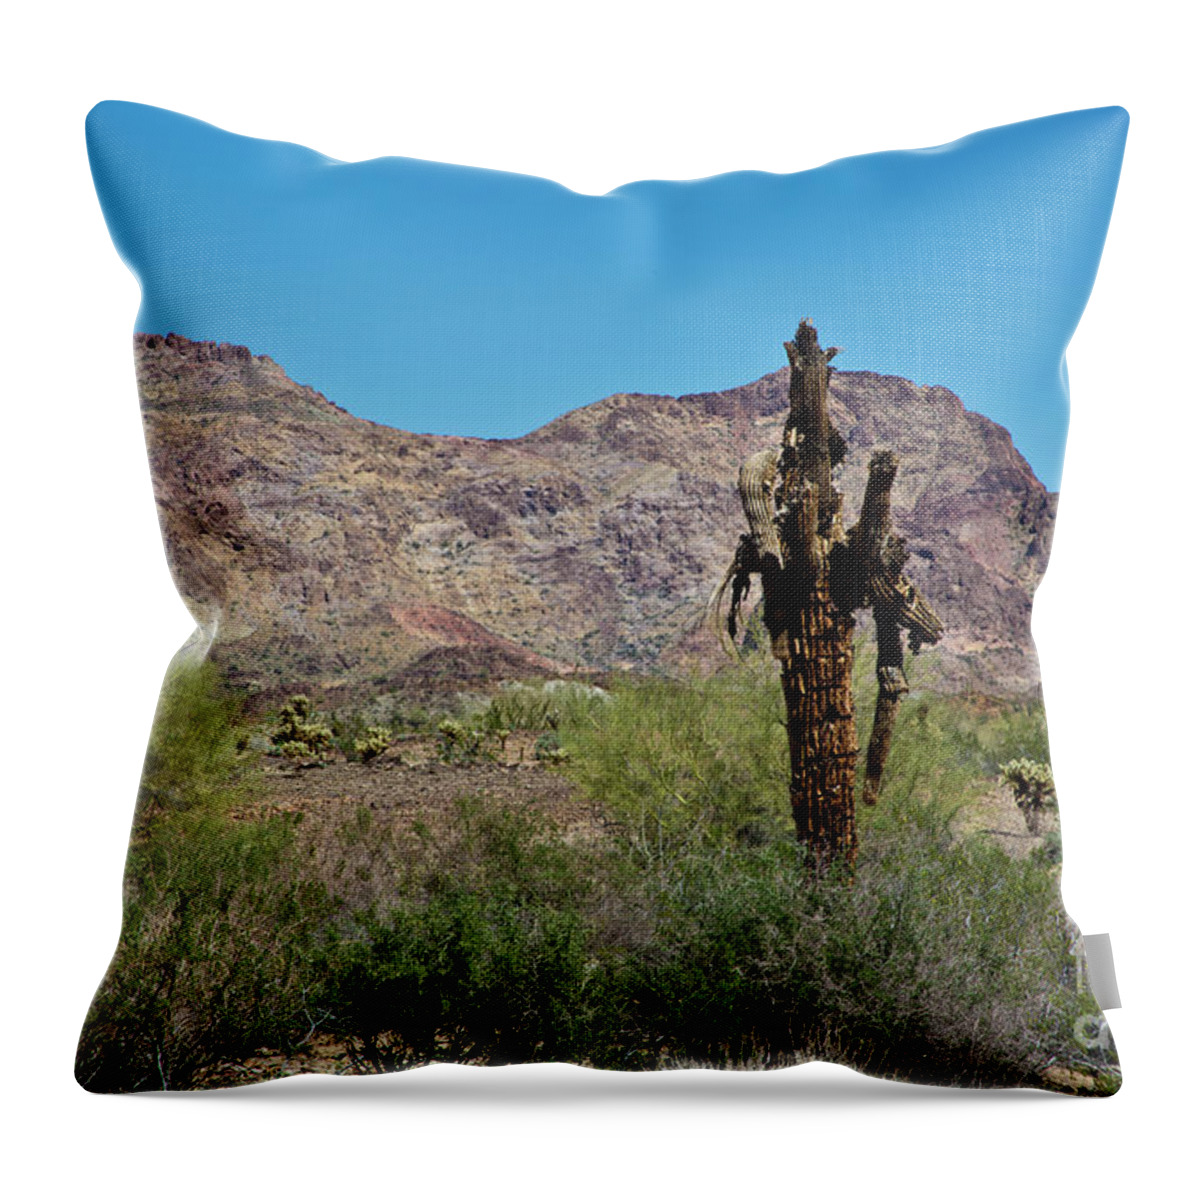 Arizona Throw Pillow featuring the photograph Dead but Not Fallen by Kathy McClure